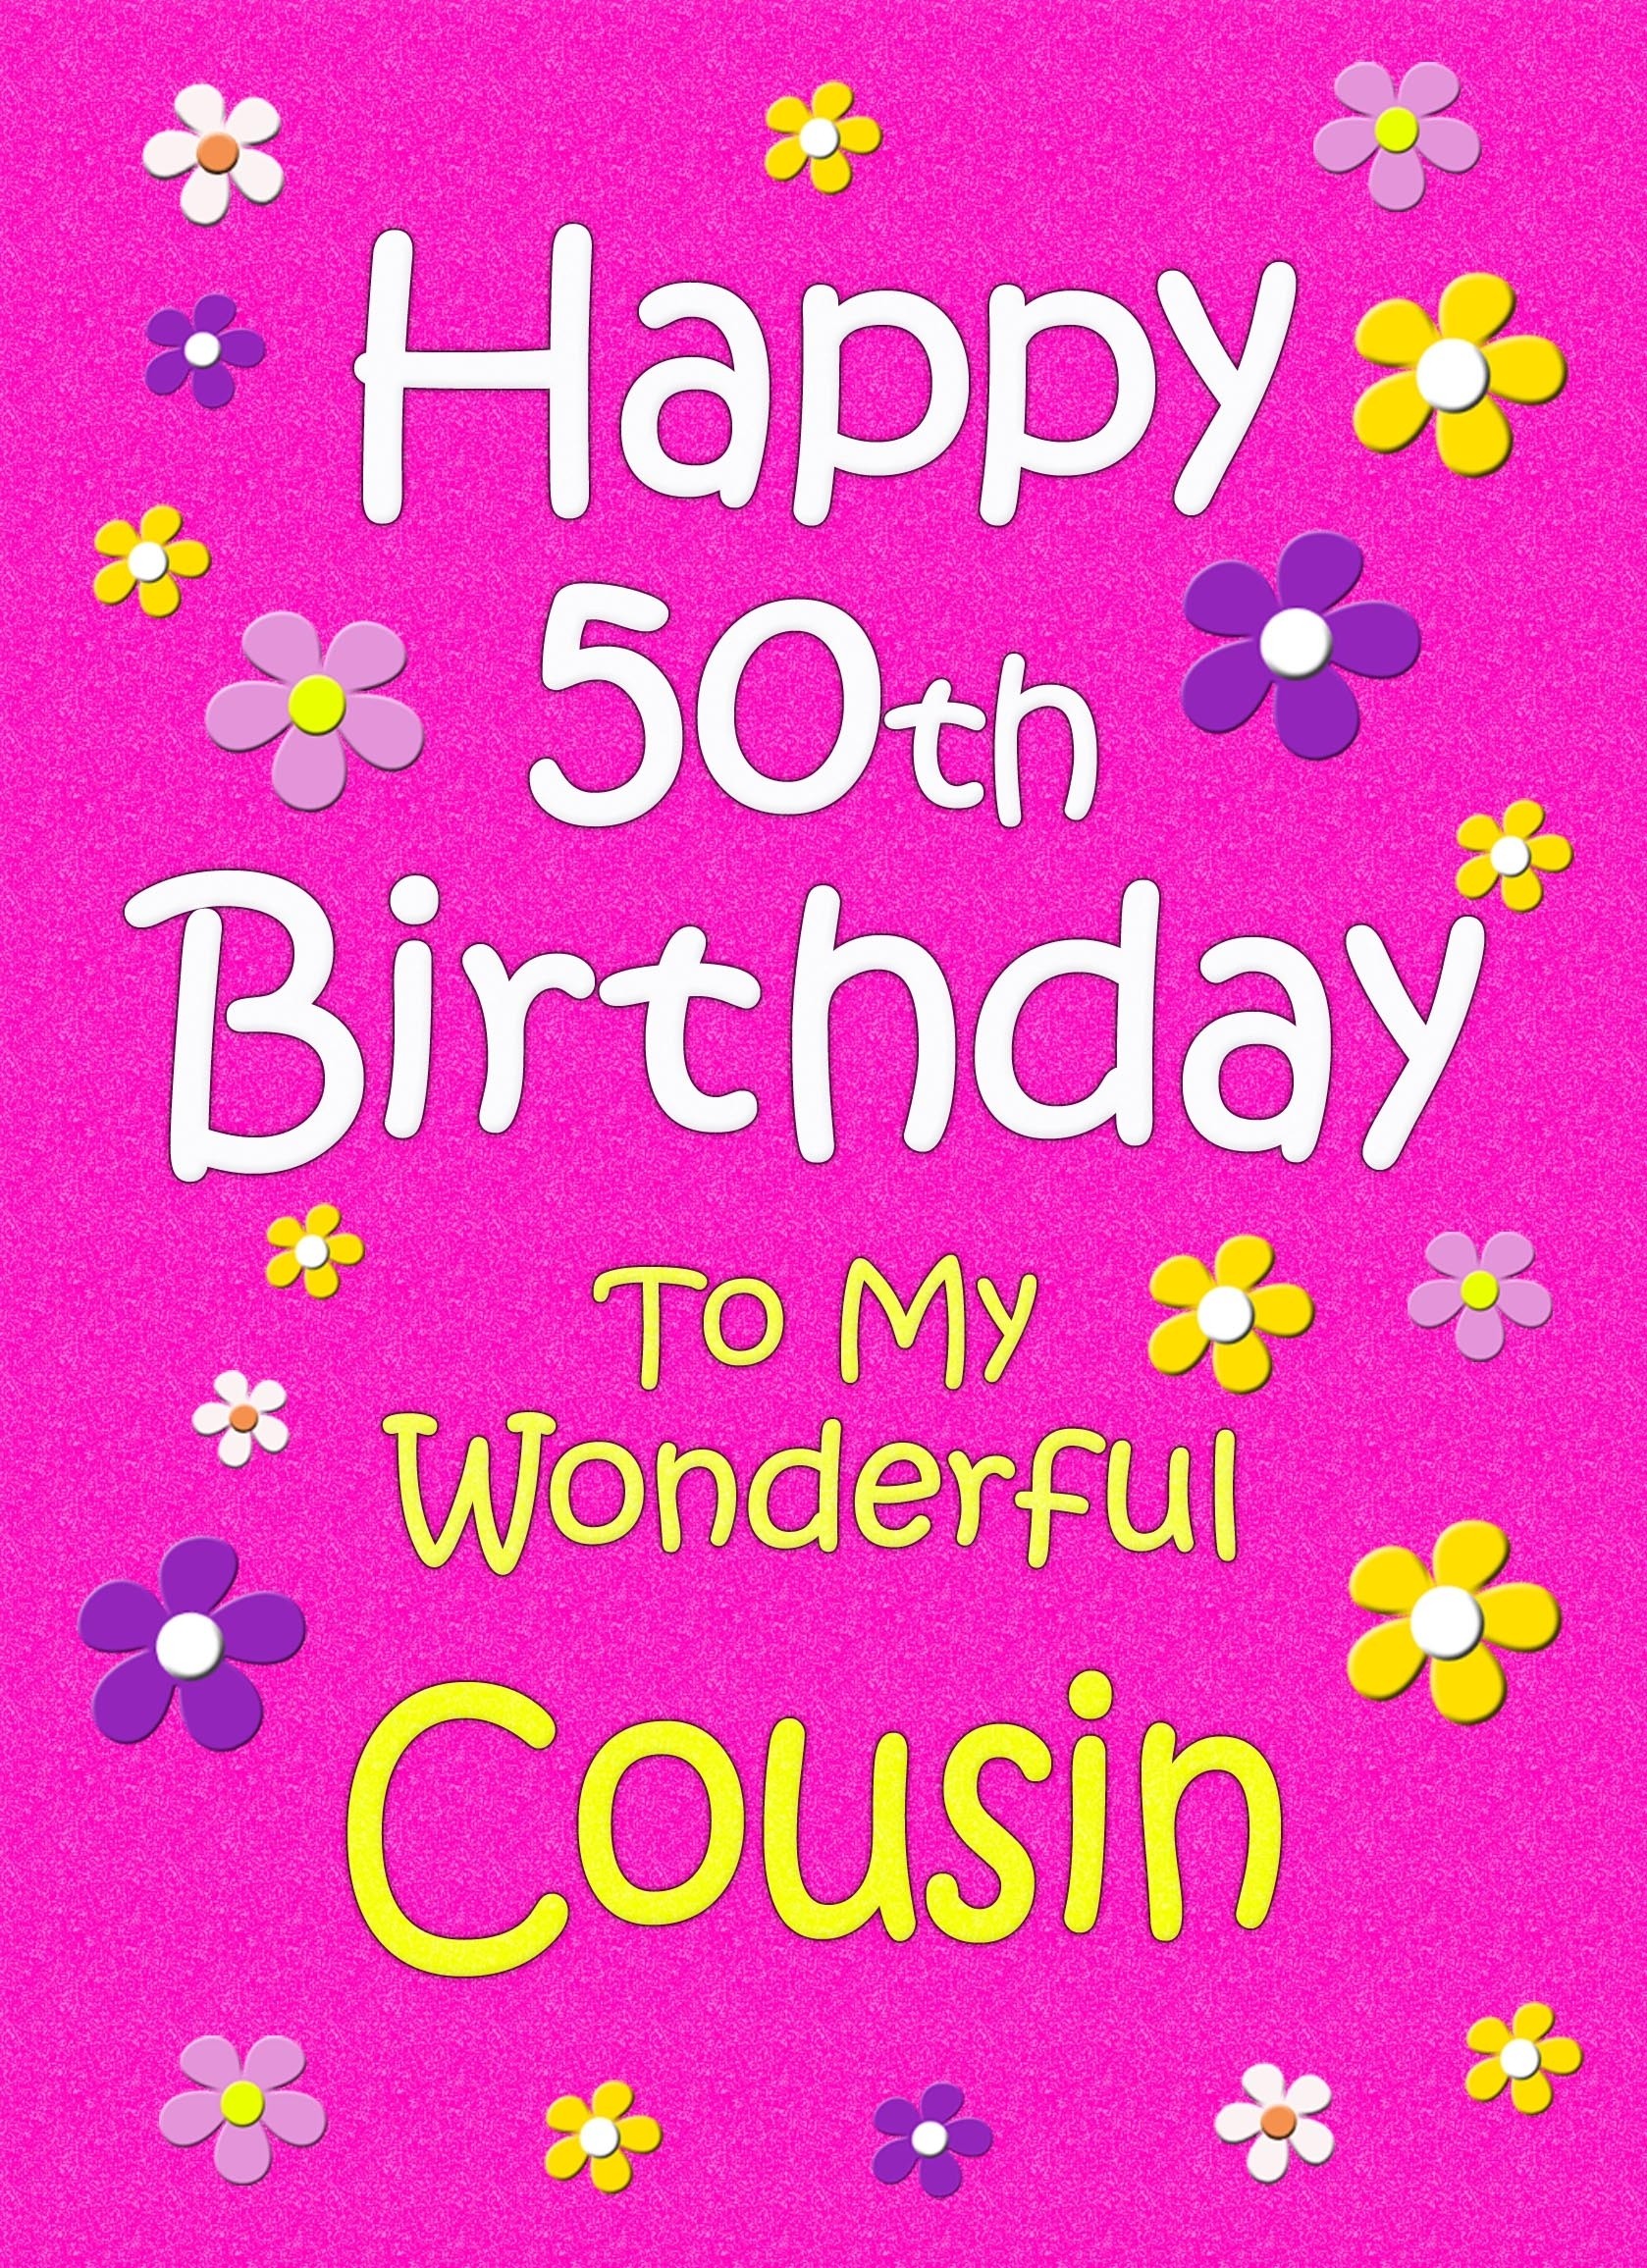 Cousin 50th Birthday Card (Pink)